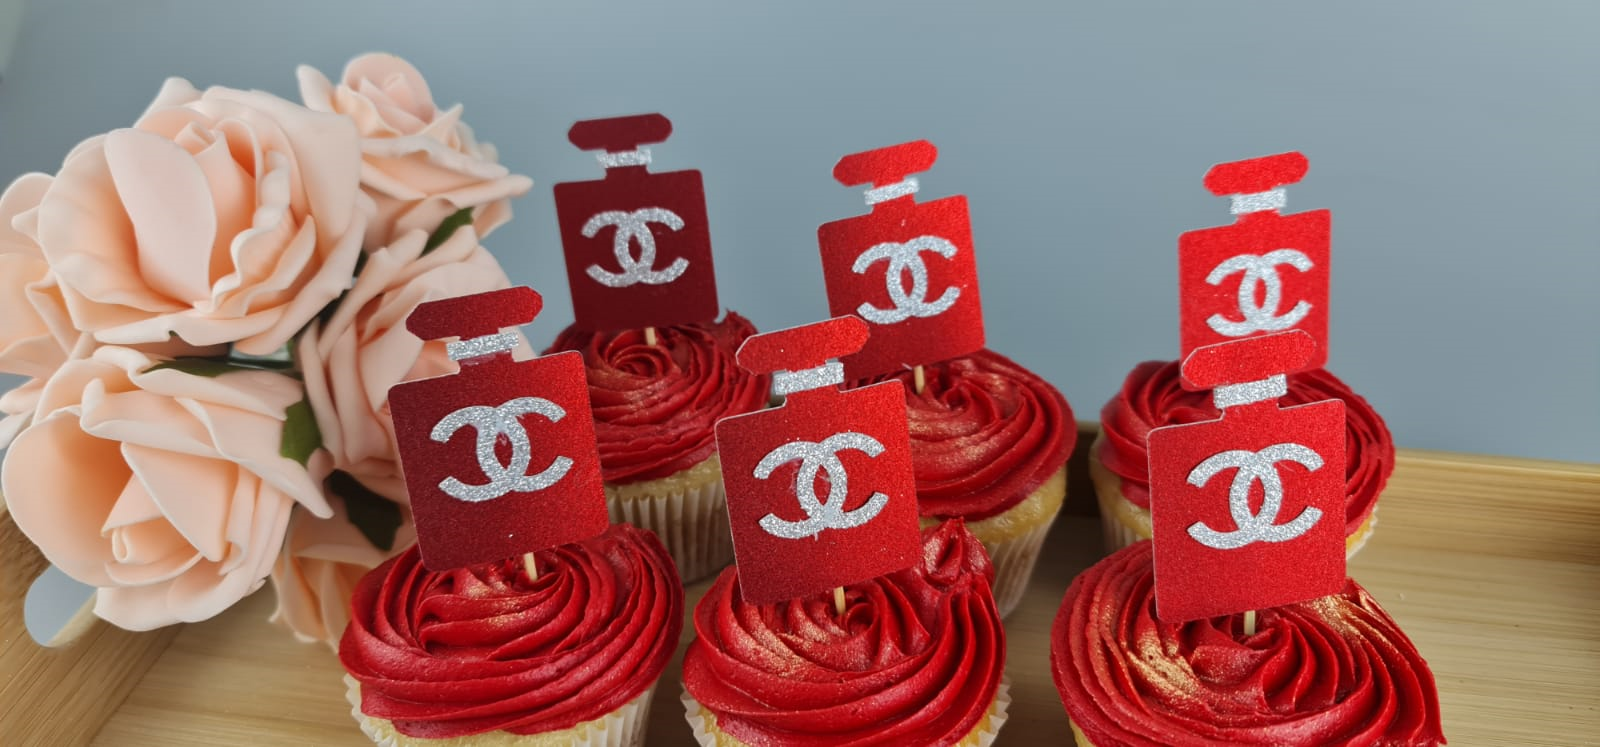 Fashion Theme Chanel Cupcakes - Pack of 6